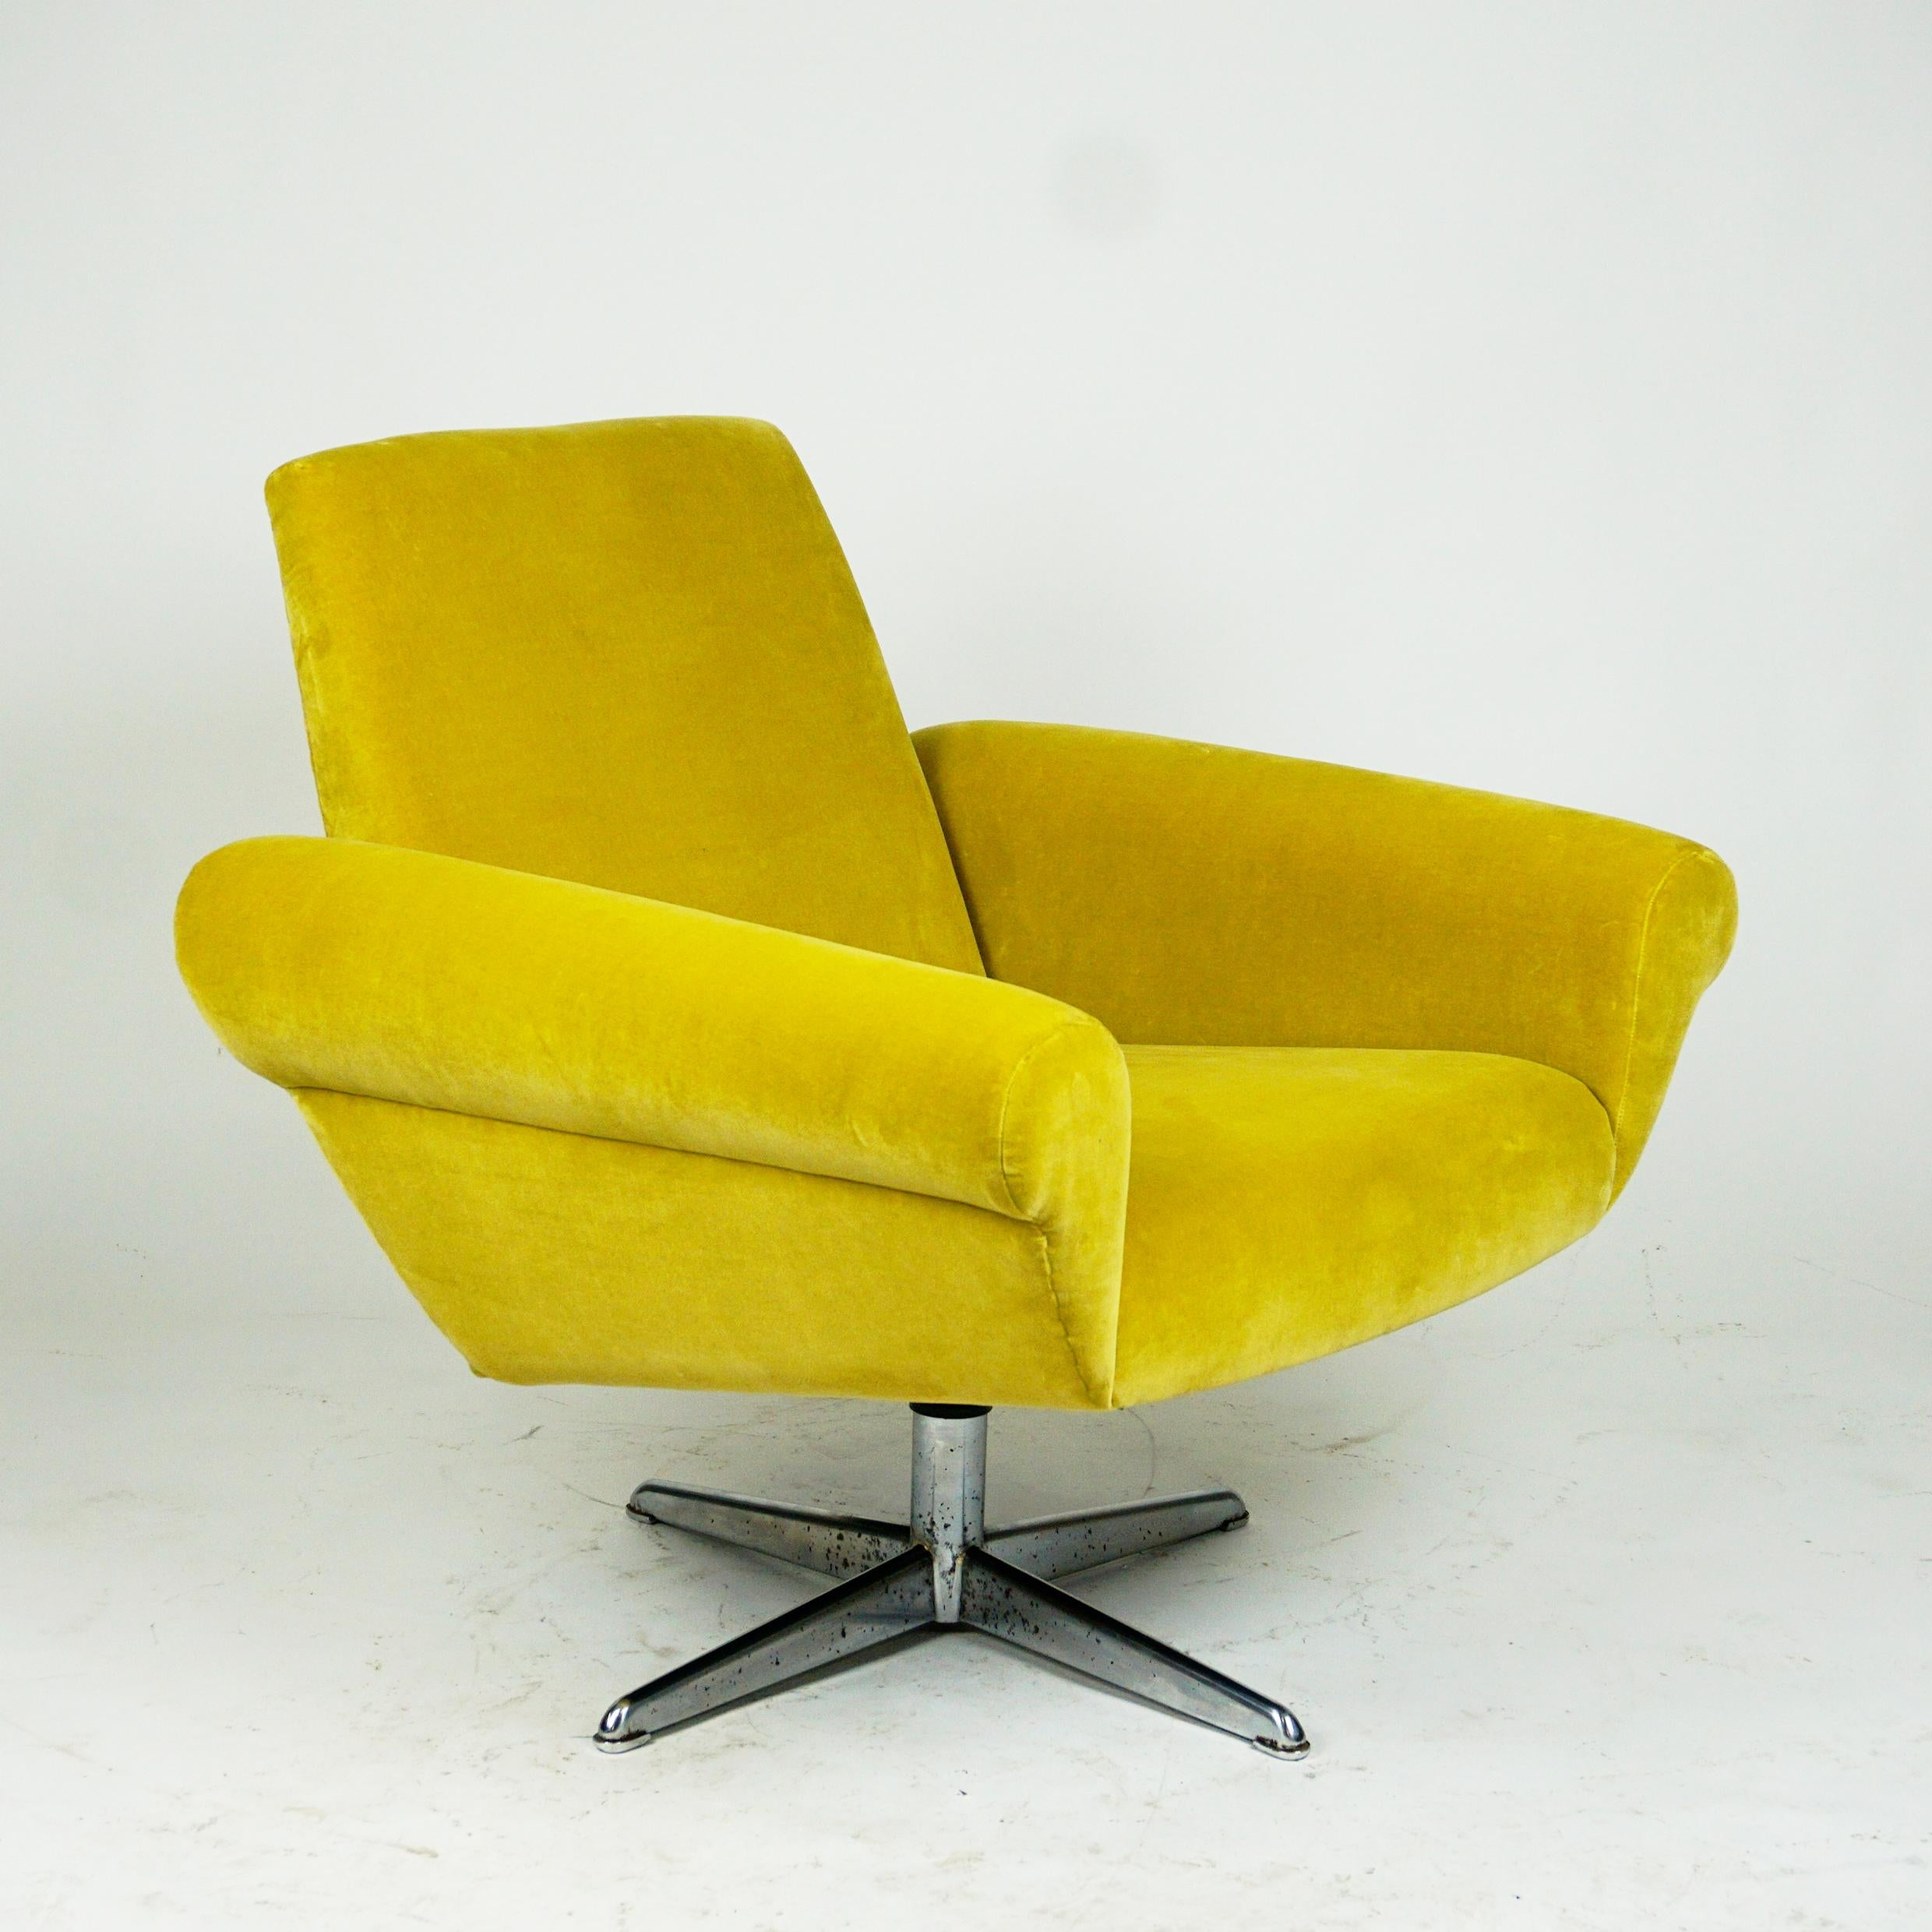 Mid-20th Century Scandinavian Lounge chair with swivel chrome base and yellow Velvet